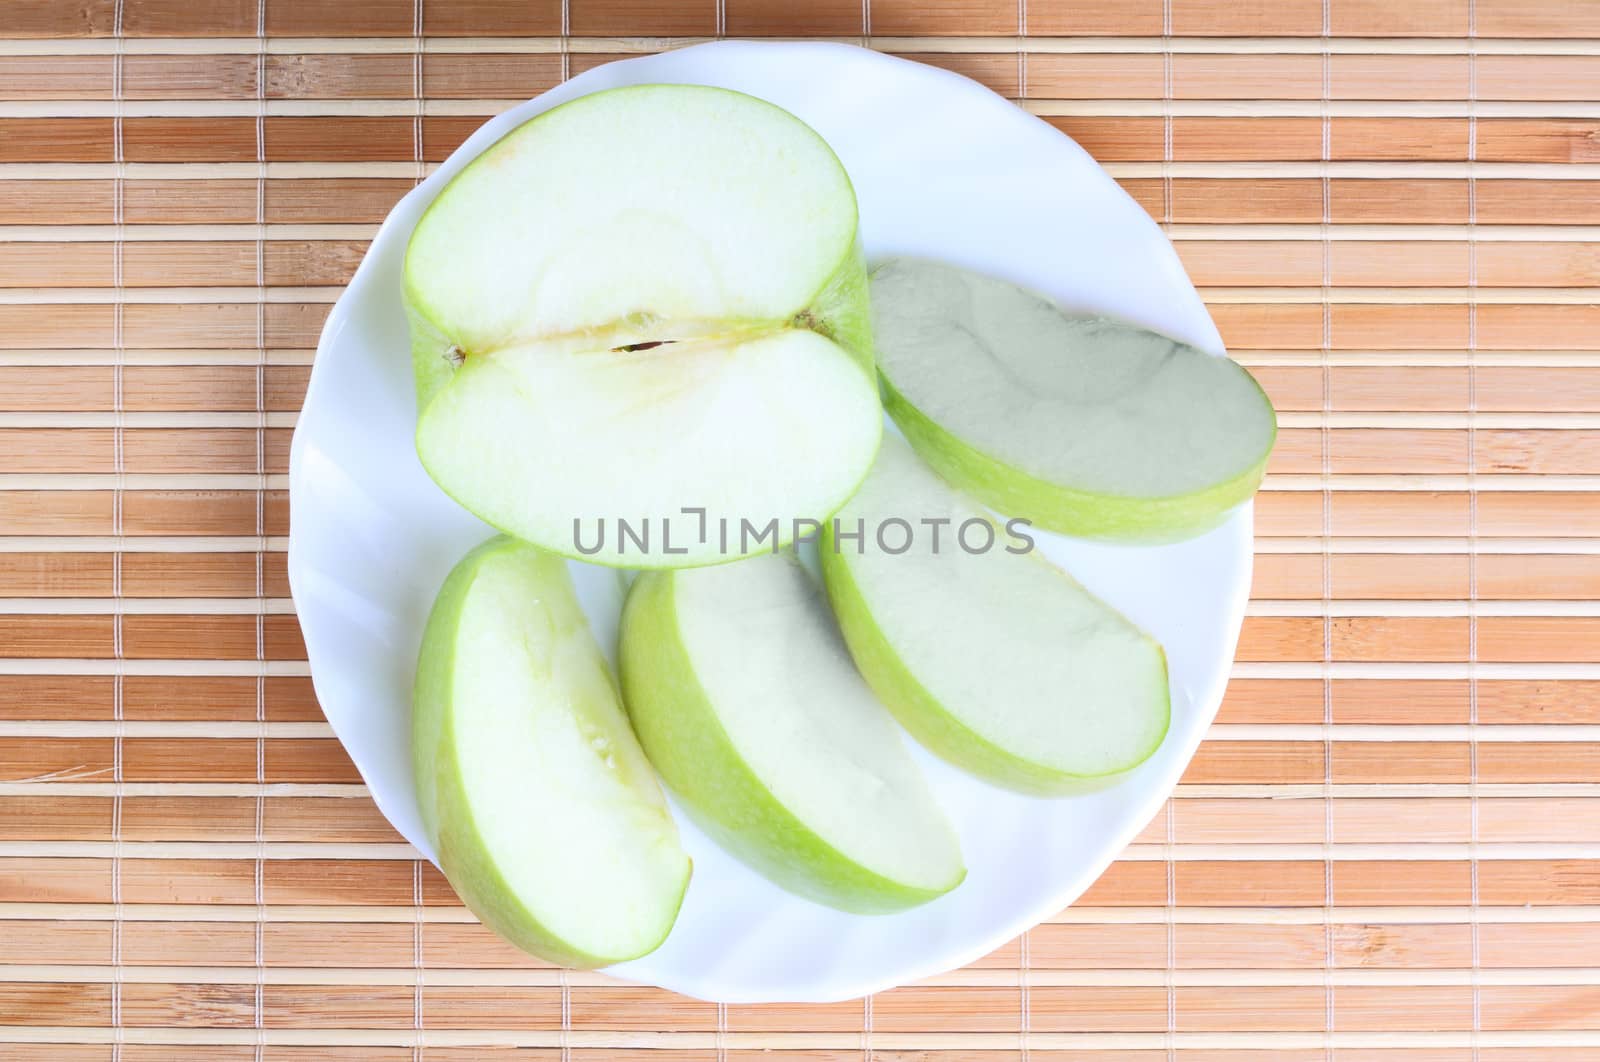 Apple pieces on the plate at the textured background